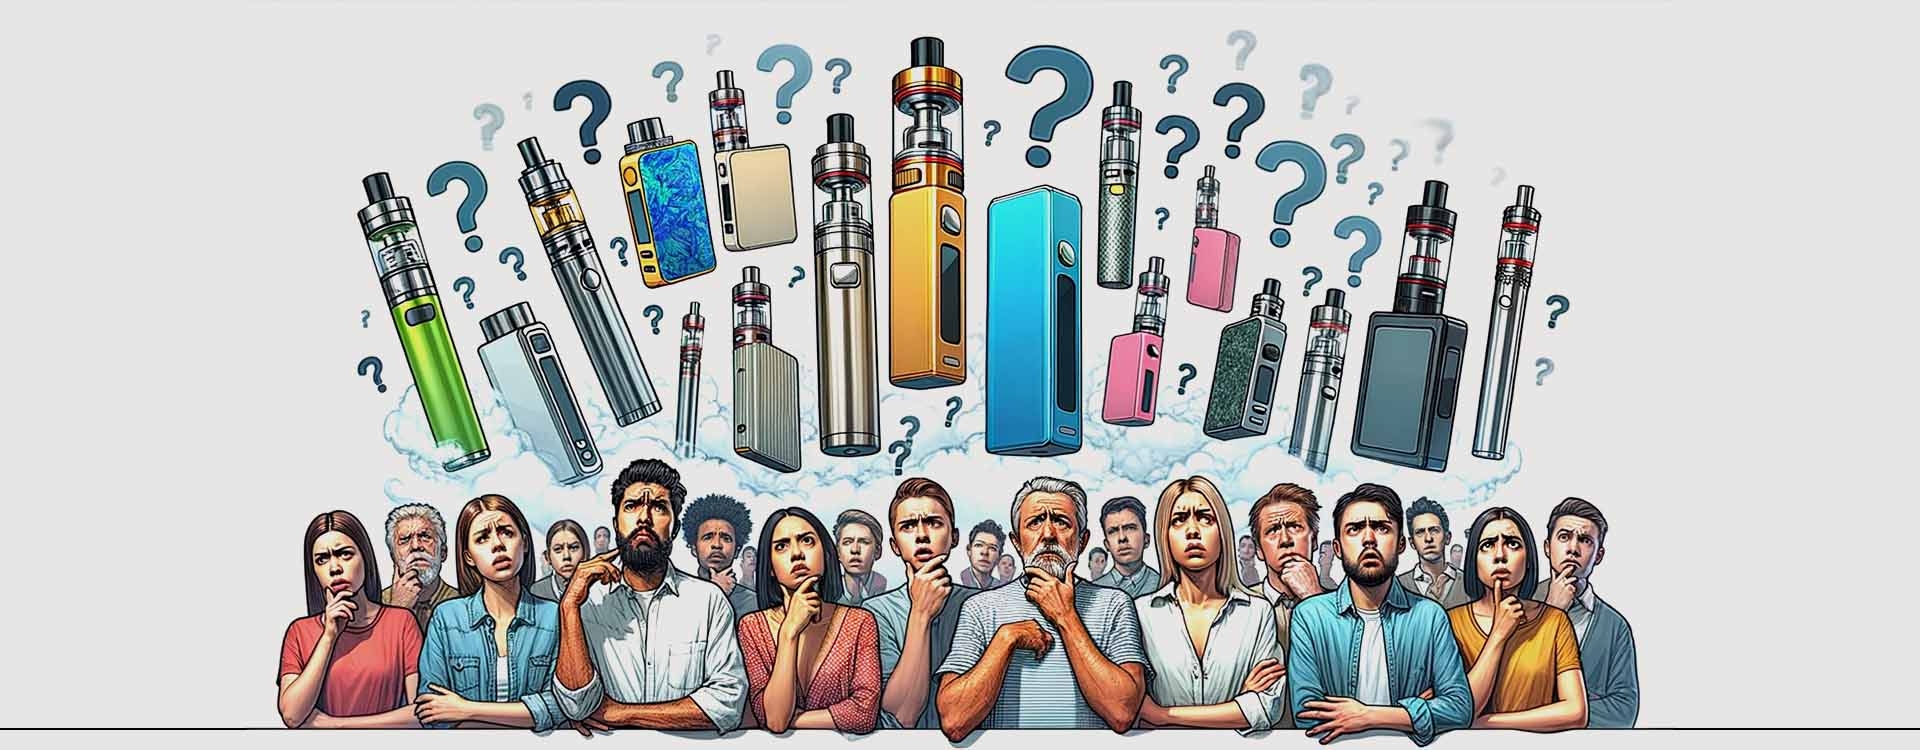 Understanding Vape Jargon: A Guide for Beginners and Enthusiasts